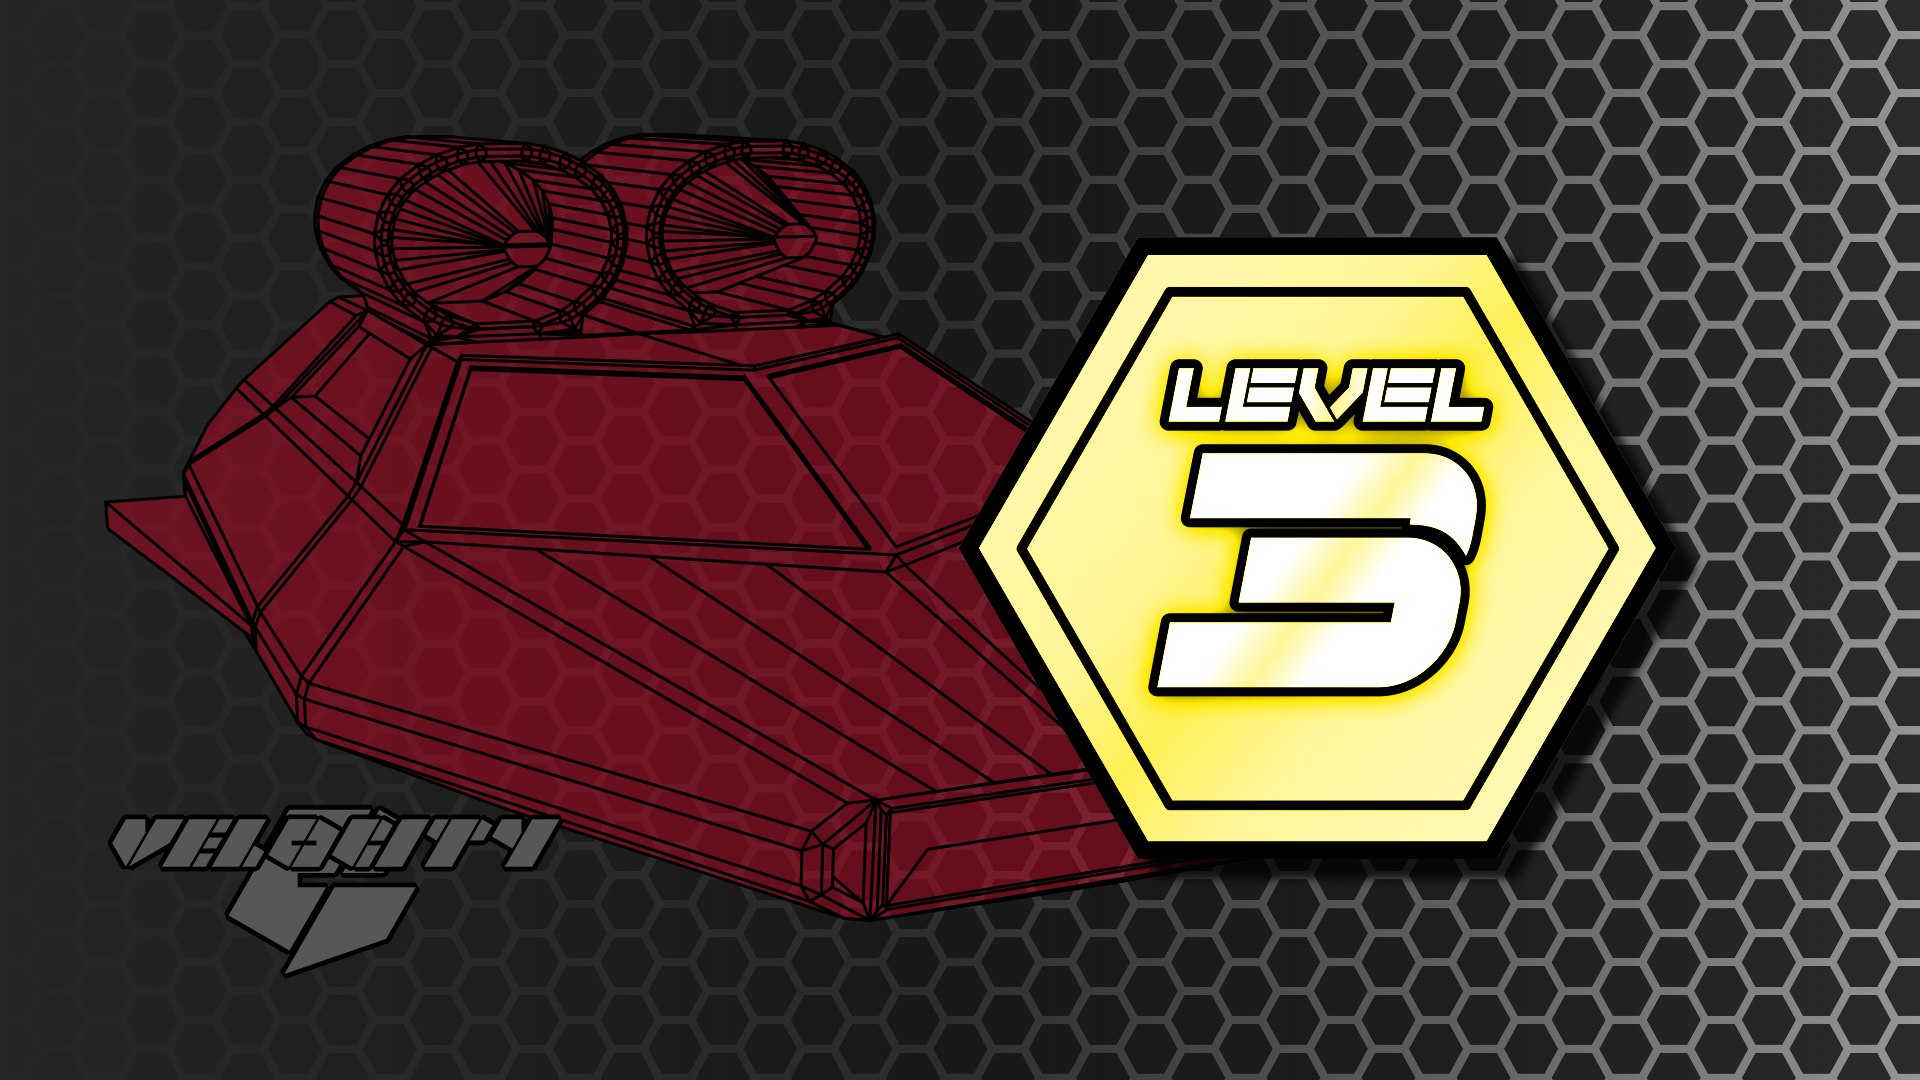 Icon for Reach level 3